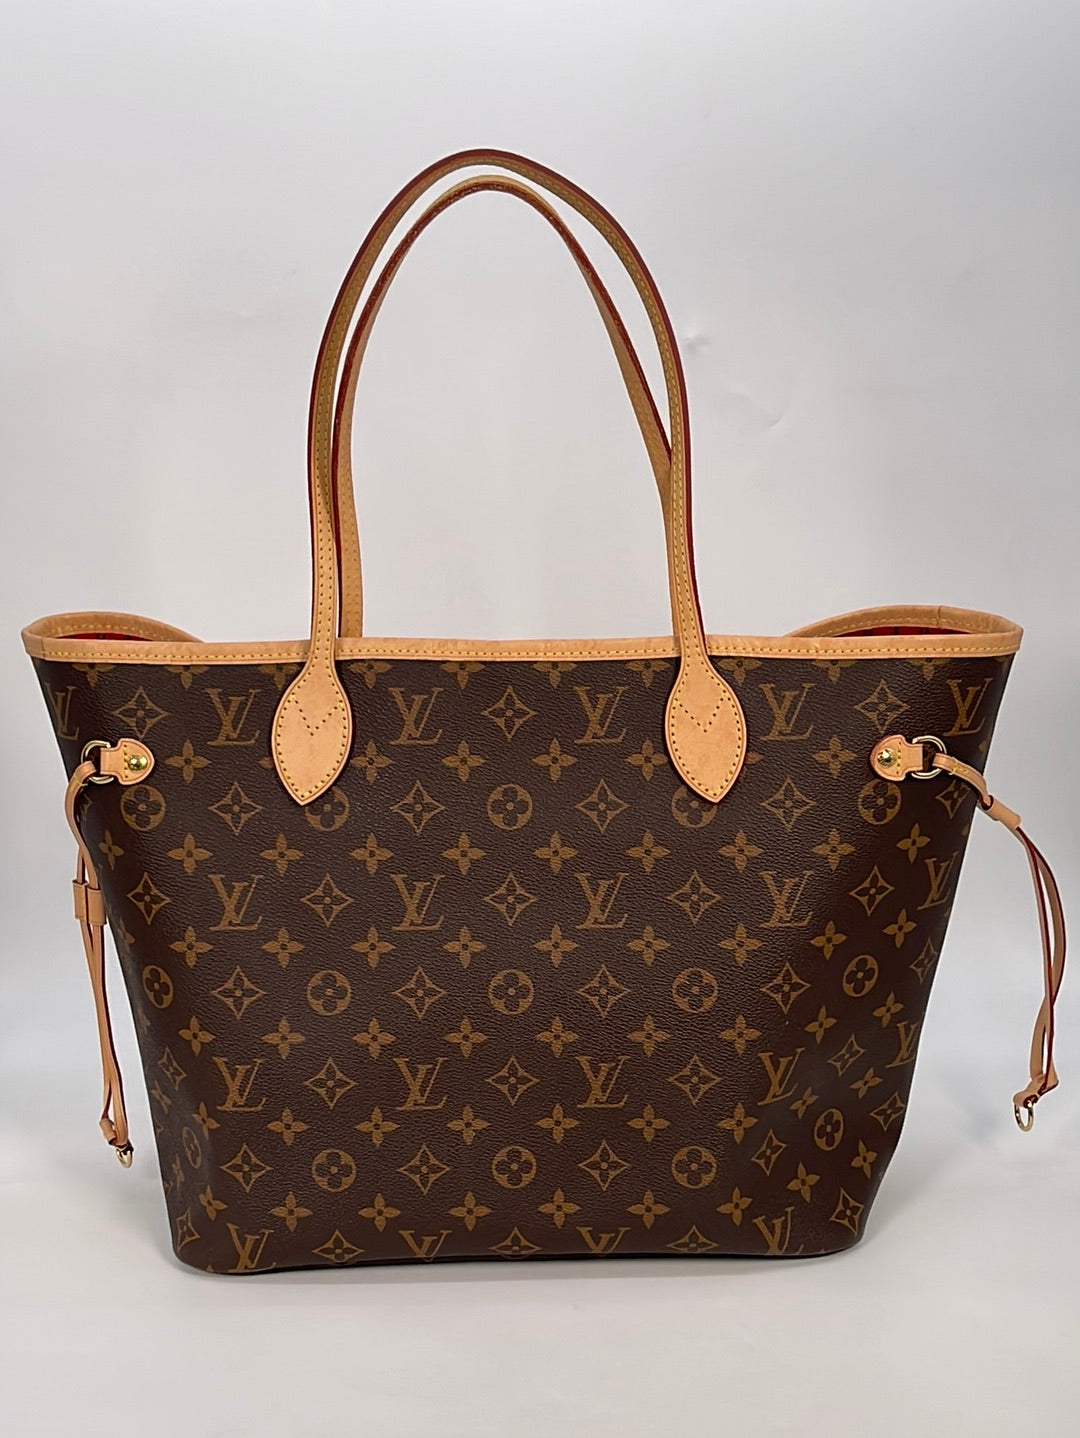 brown louis vuitton bag with red inside